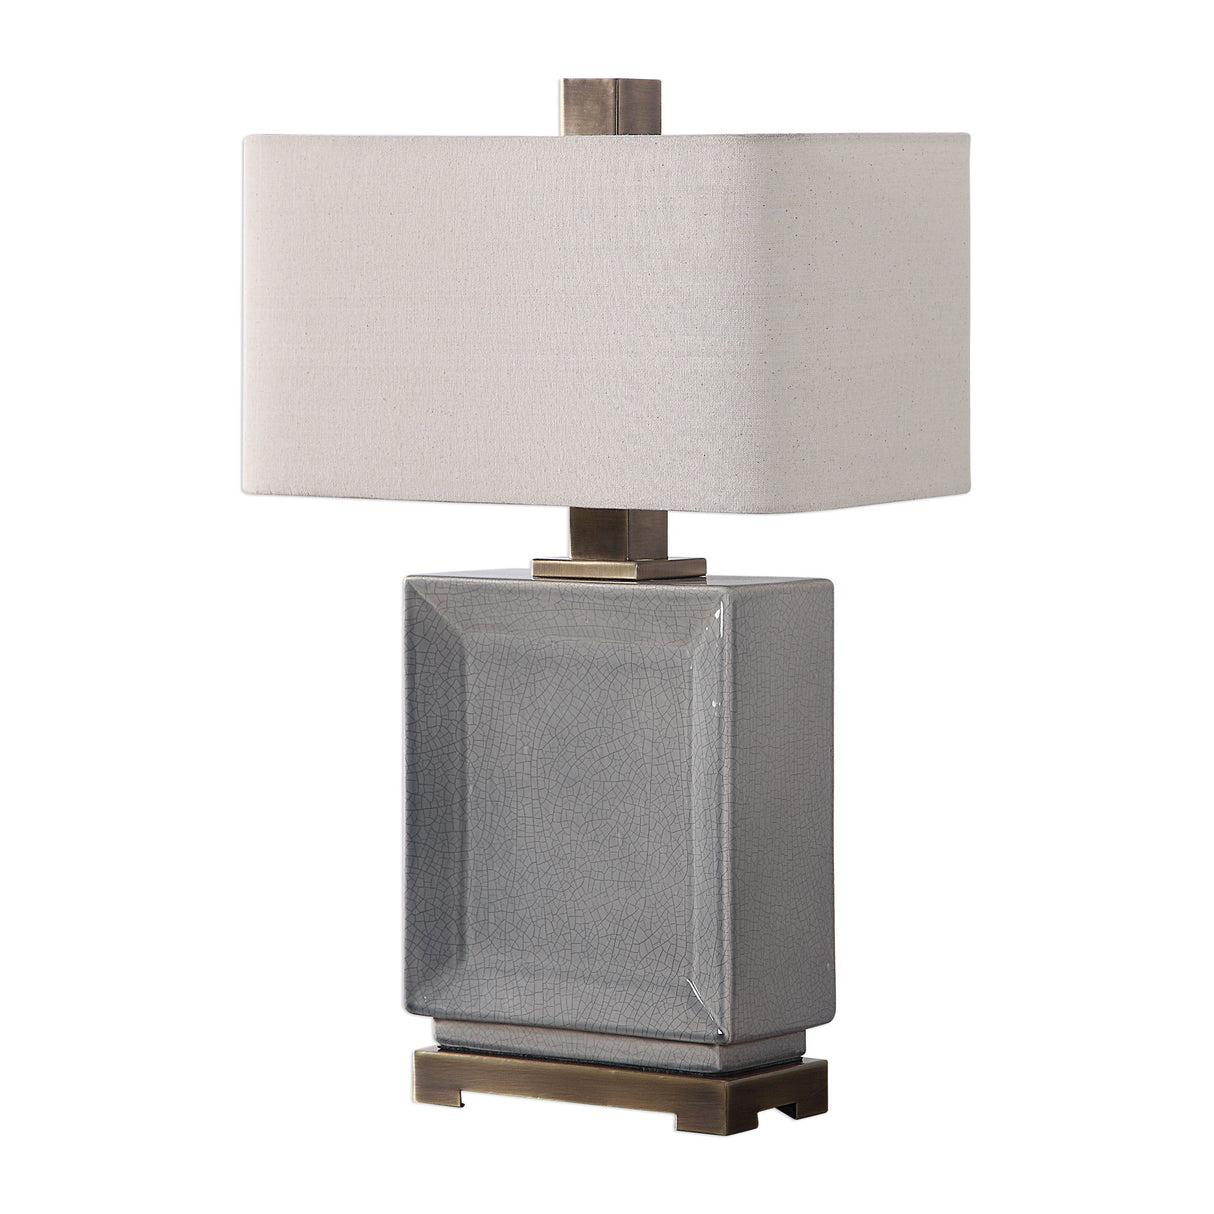 Abbot - Crackled Table Lamp - Gray